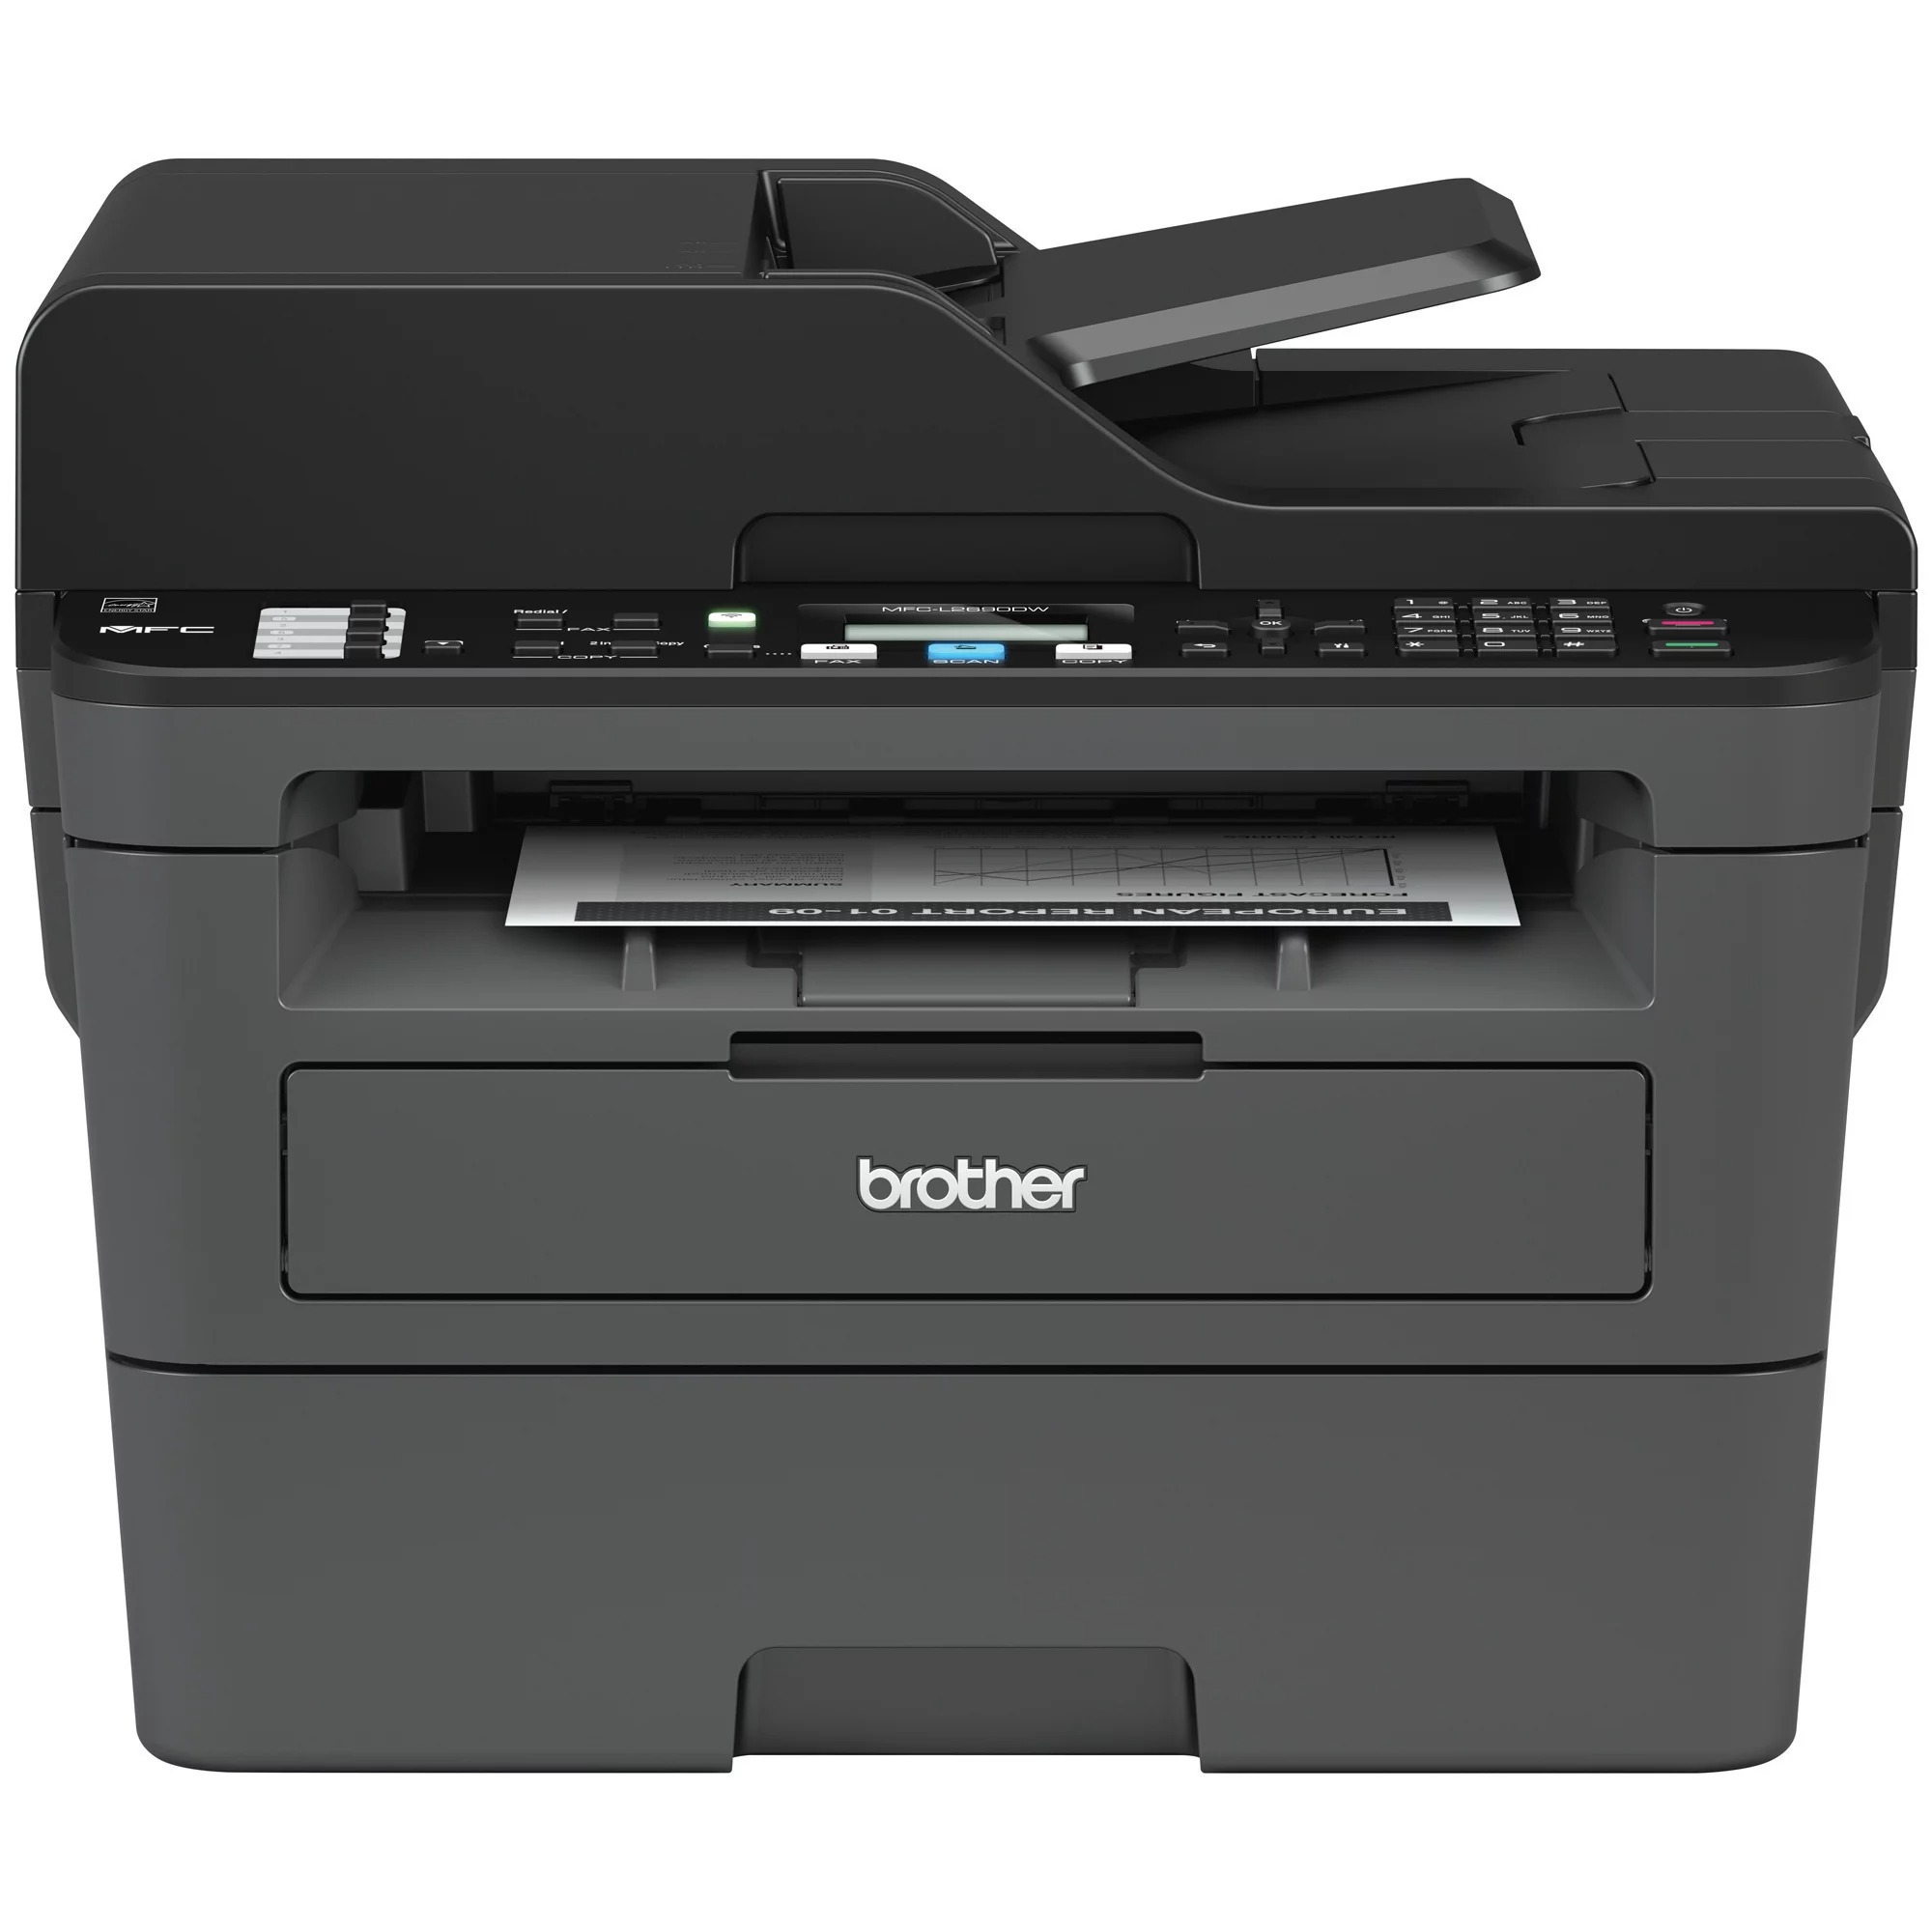 Brother MFC-L2690DW Monochrome Laser All-in-One Printer, (Print, Fax, Scan) $170 at Walmart